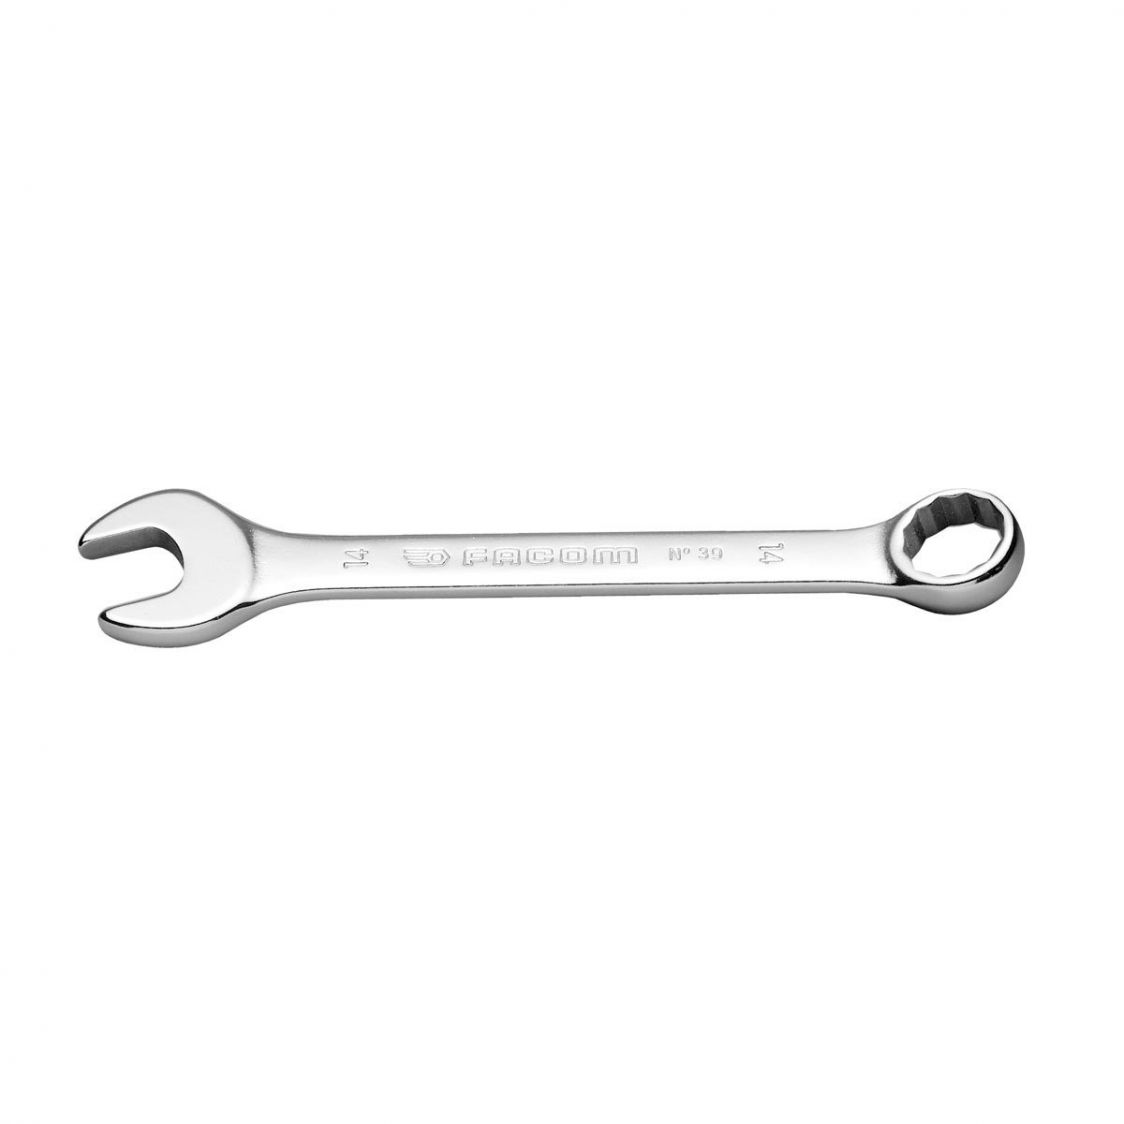 FACOM 39.3.2H - 3.2mm Metric Stubby Combination Spanner